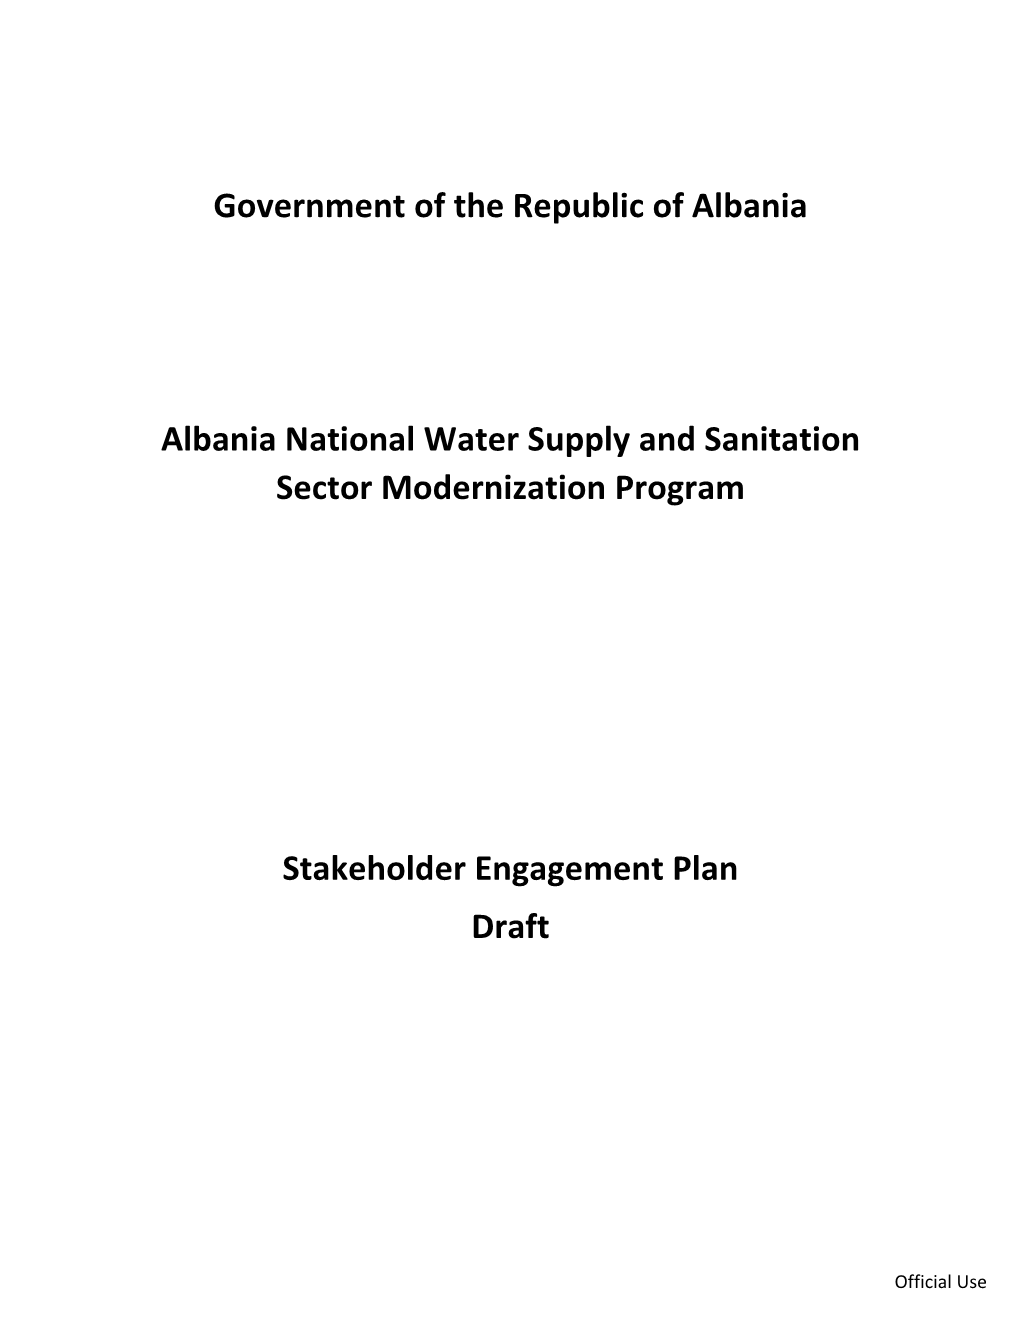 Government of the Republic of Albania Albania National Water